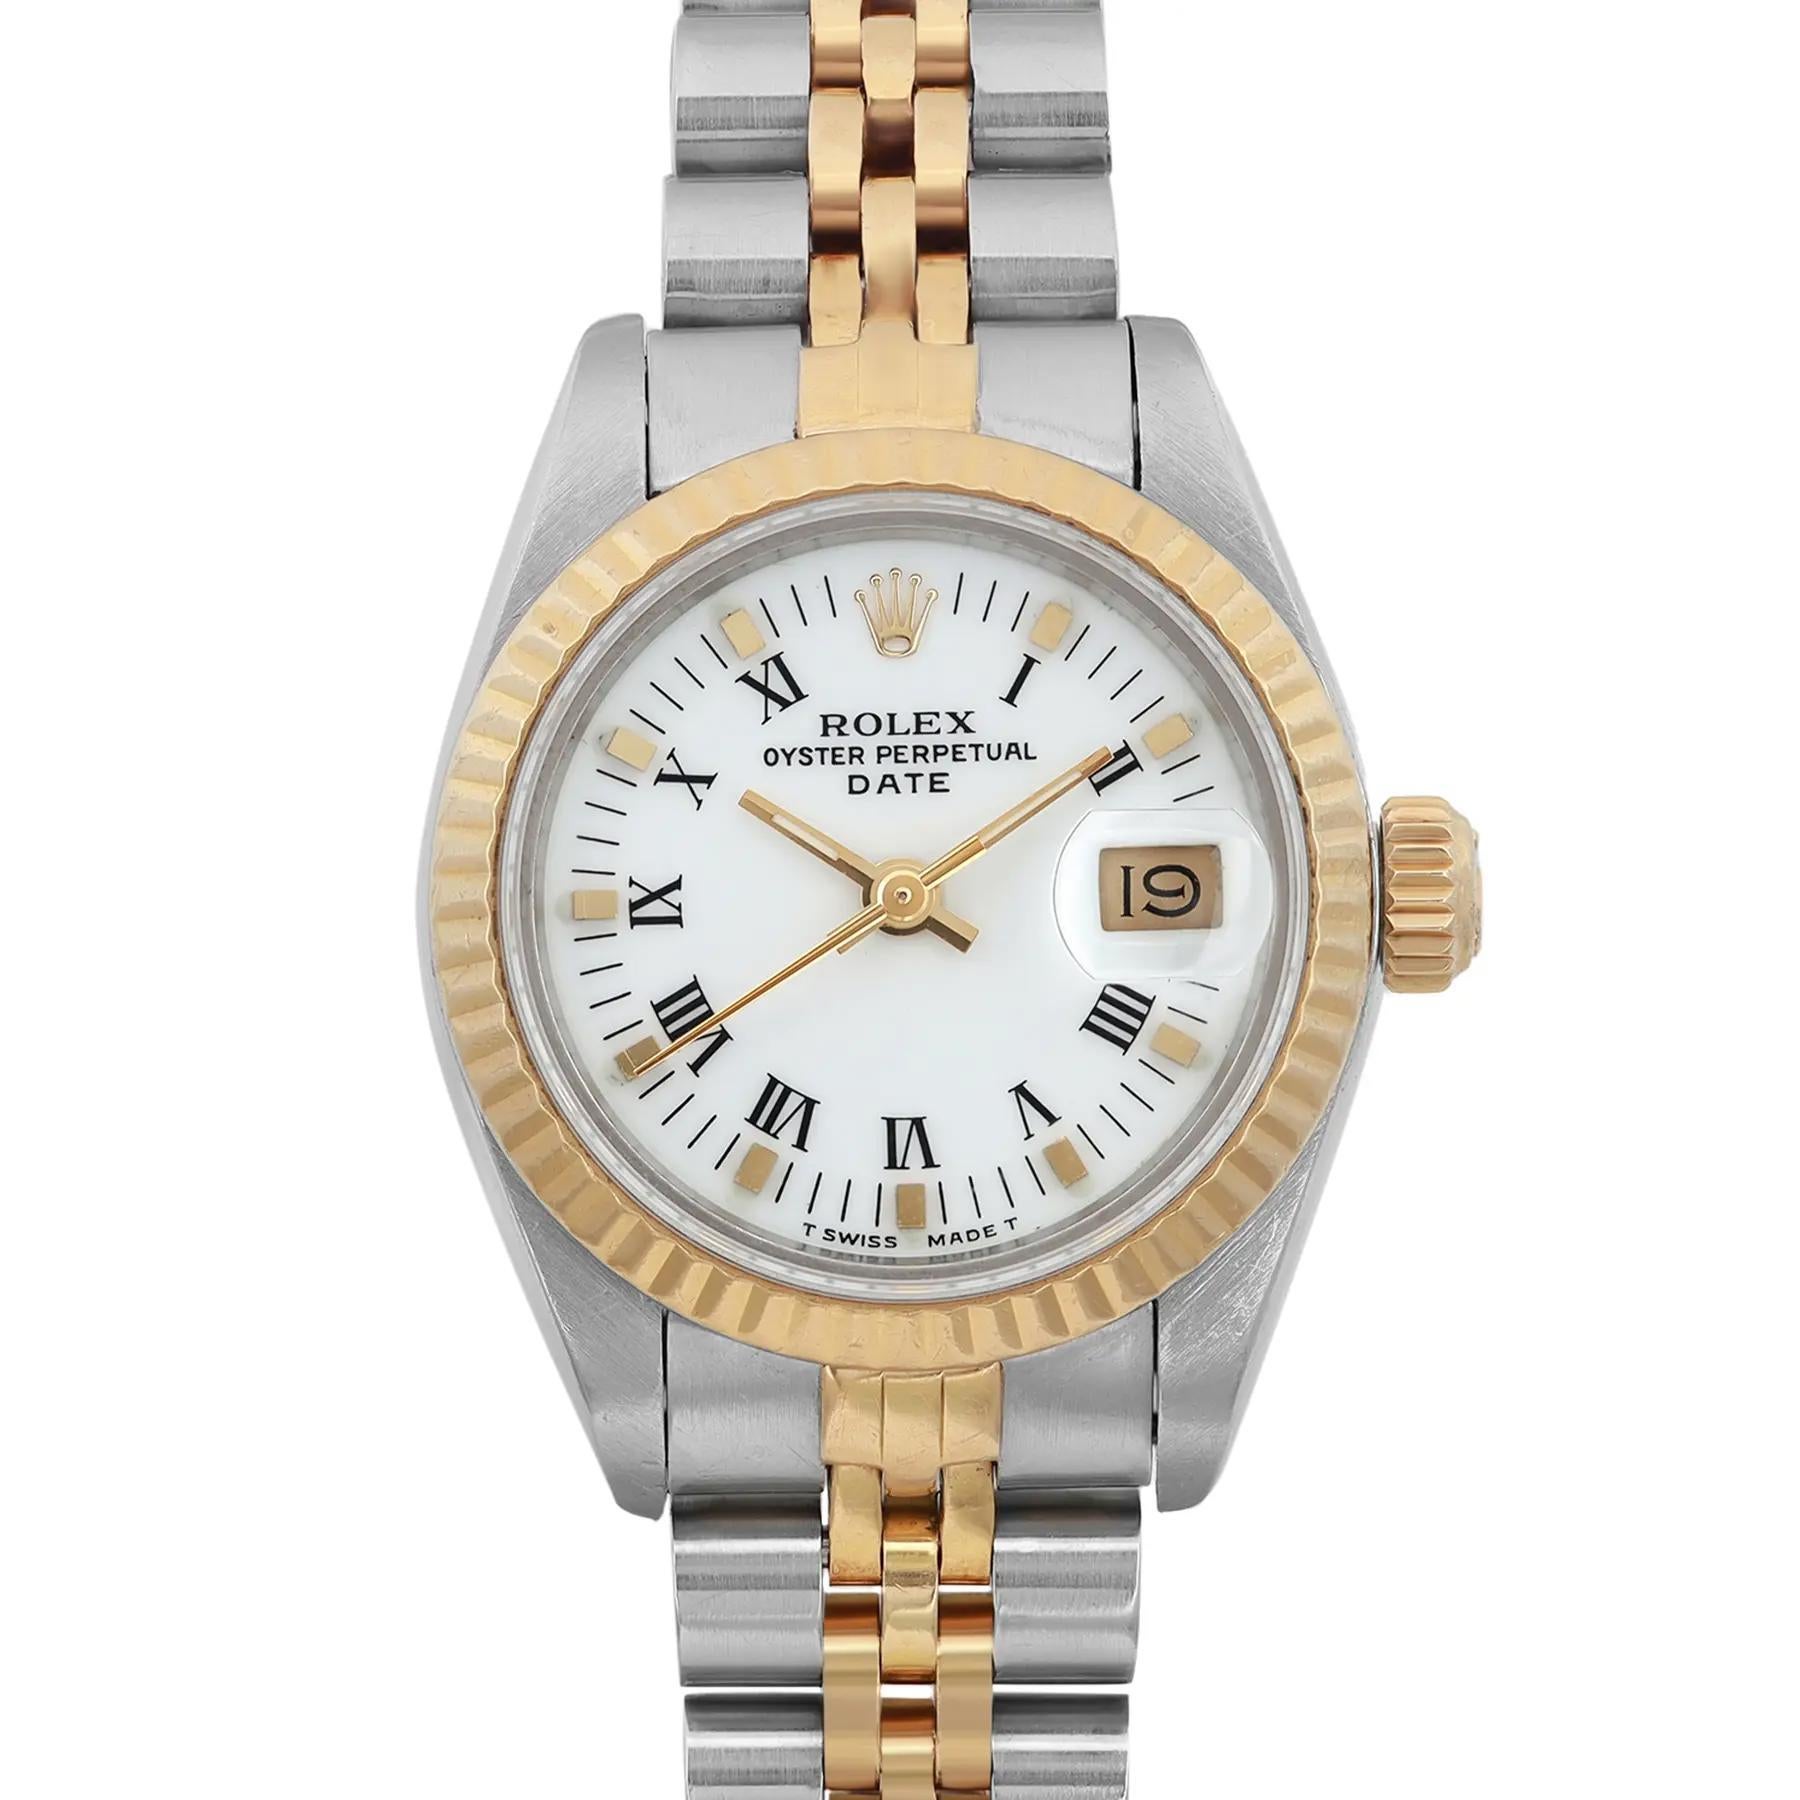 Pre-owned. This timepiece was produced in 1990. Moderate slack on the bracelet. 

Brand and Model Information:
Brand: Rolex
Model: Rolex Datejust
Model Number: 69173

Type and Style:
Type: Wristwatch
Style: Luxury
Department: Women
Display: